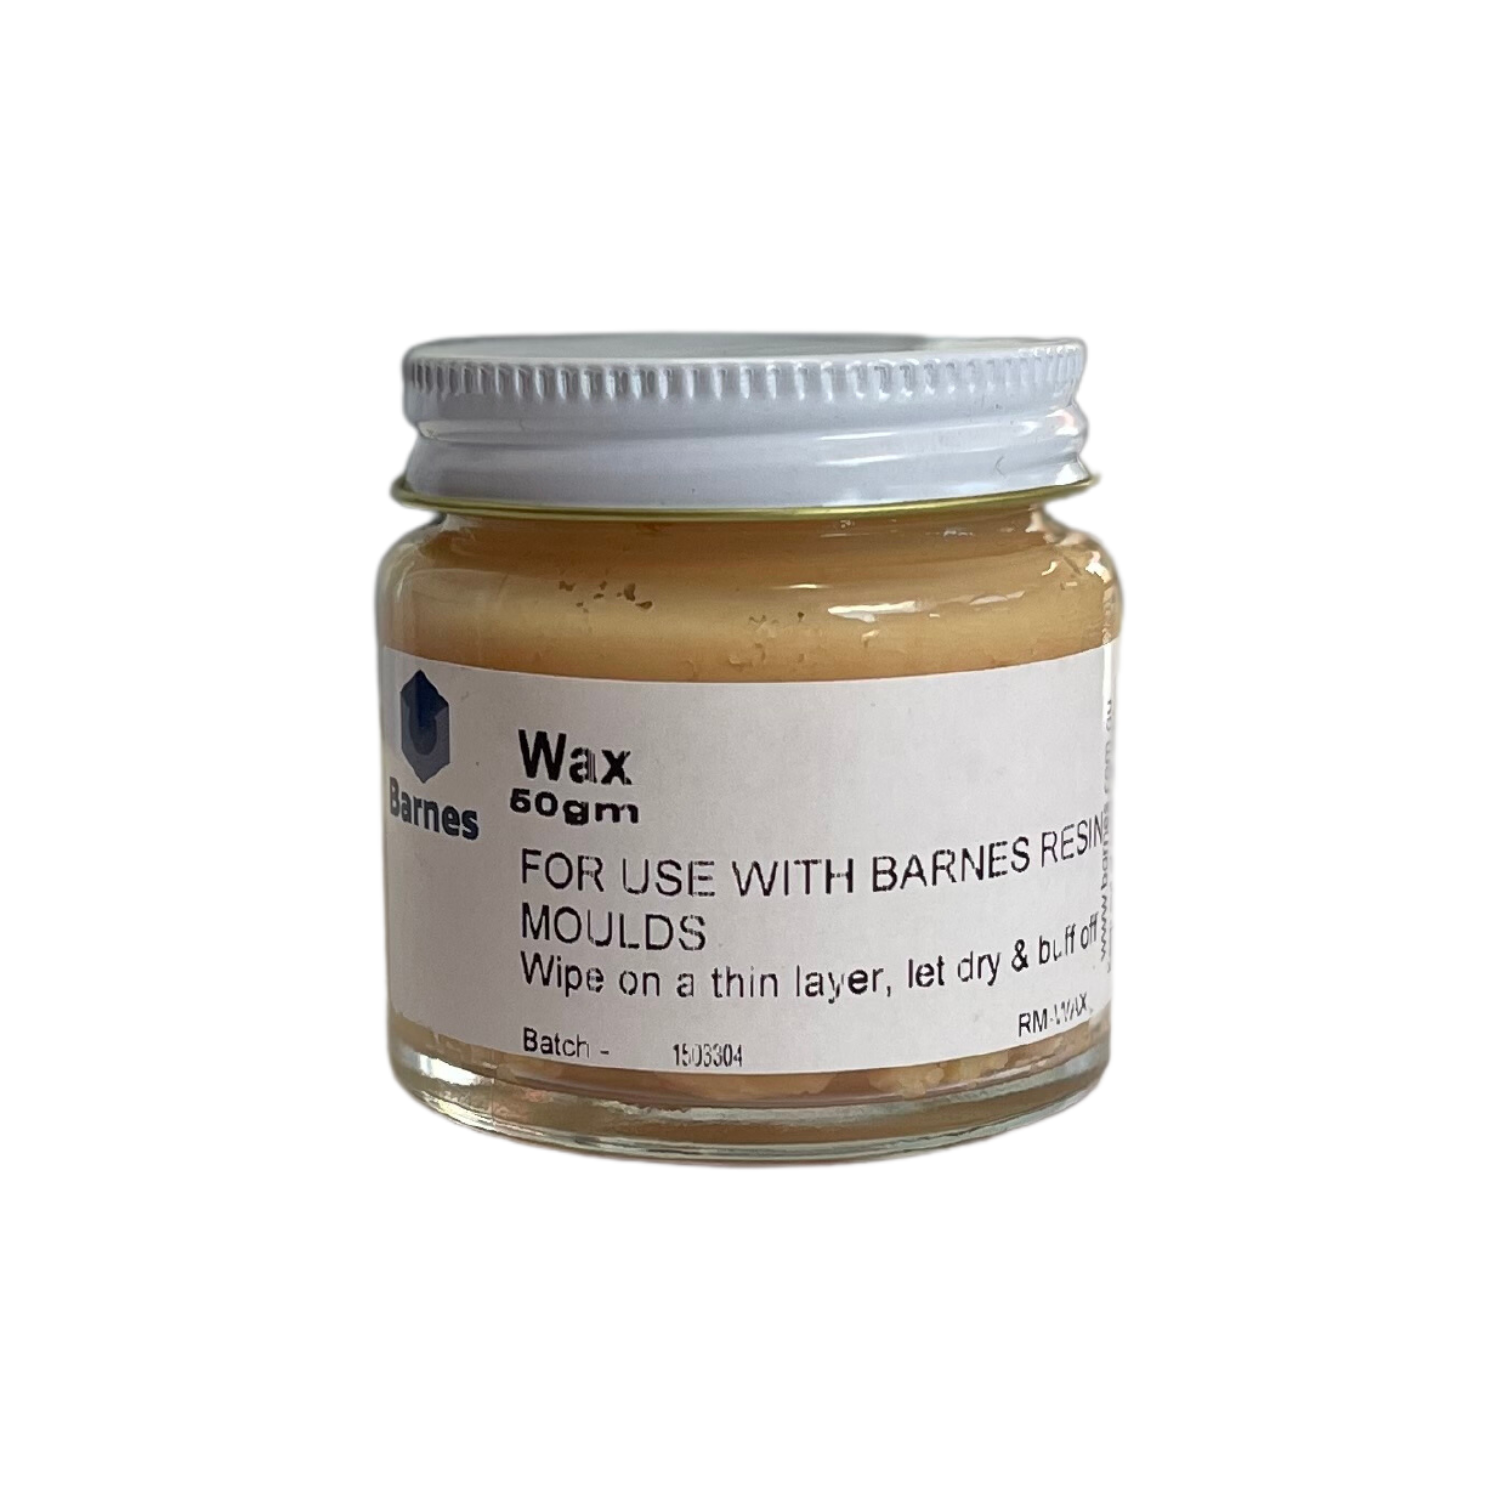 Resin Mould Wax 50gm